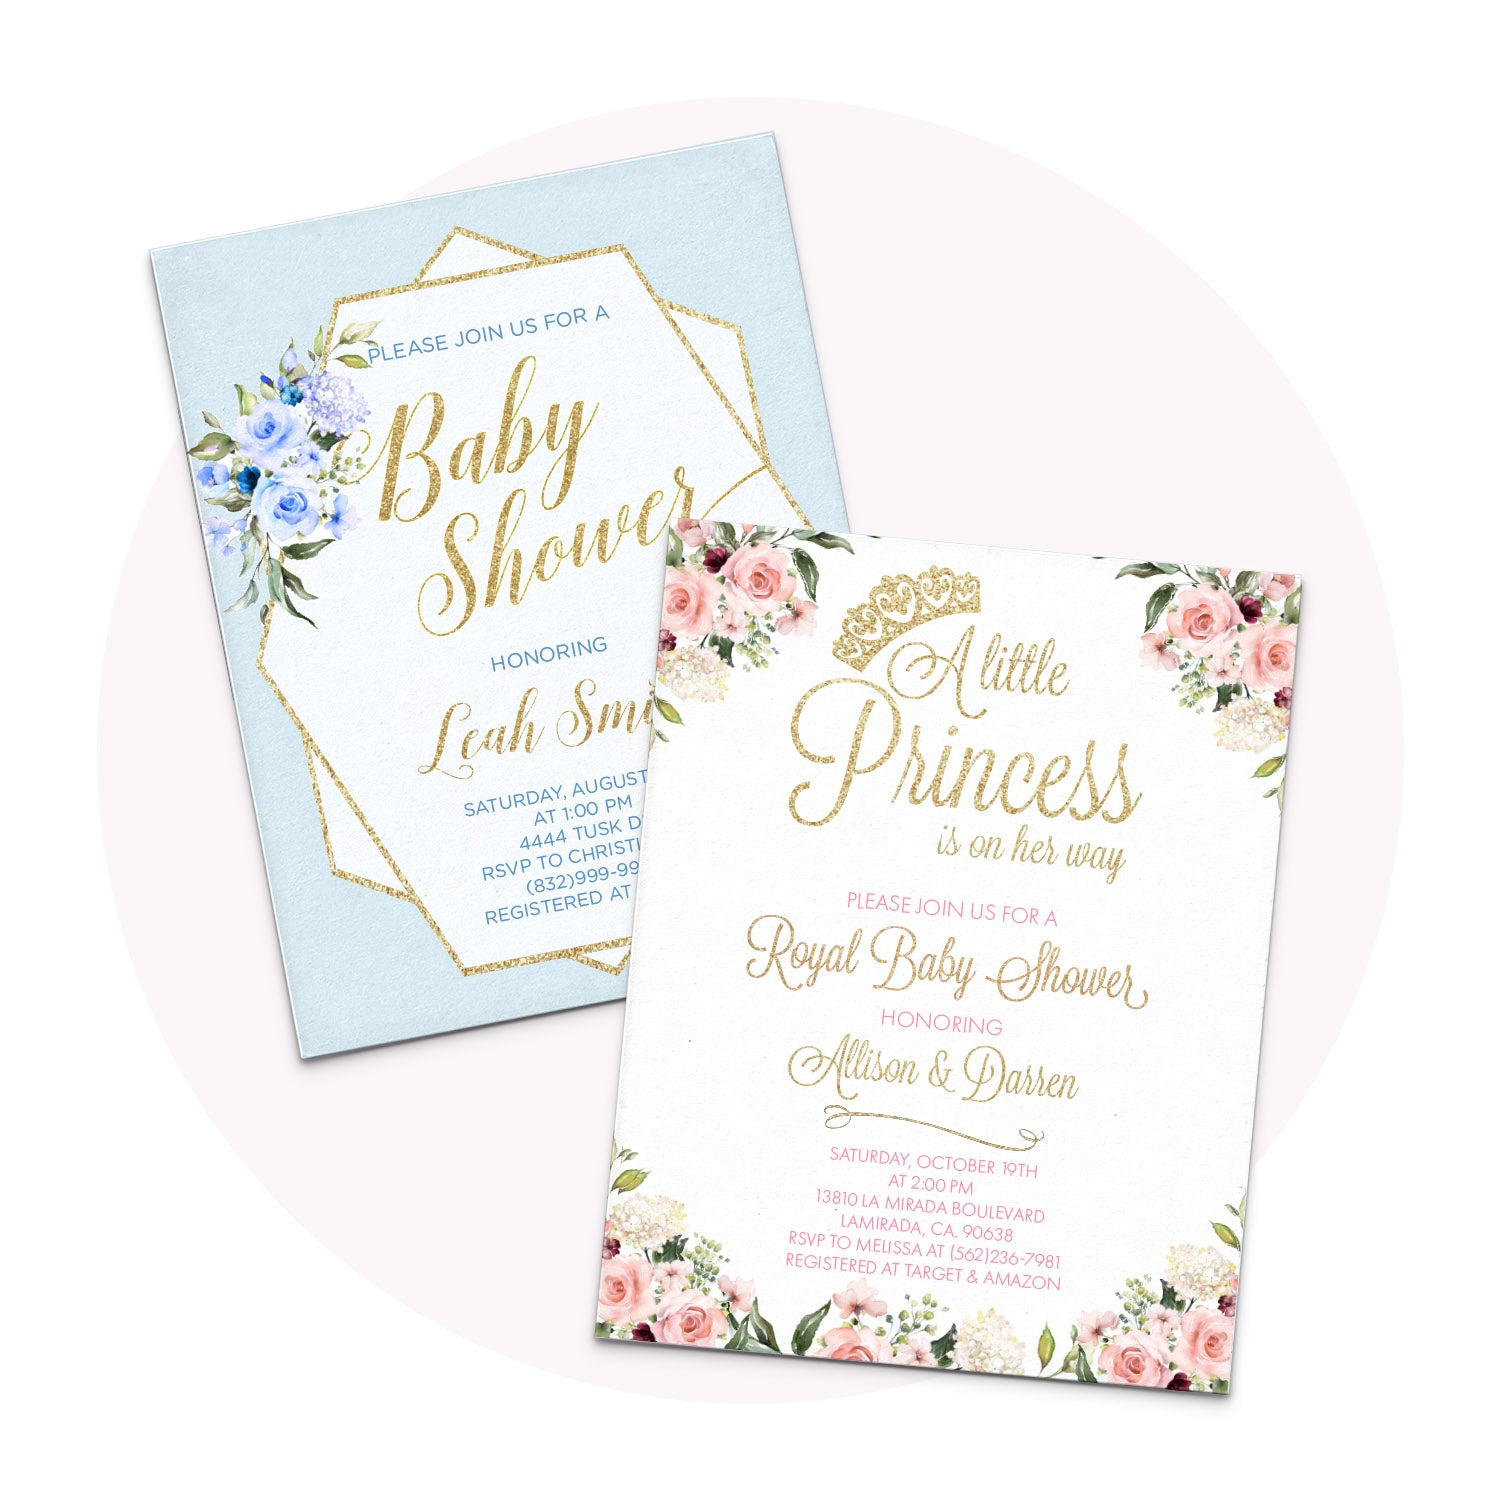 Personalized Baby Shower Invitations